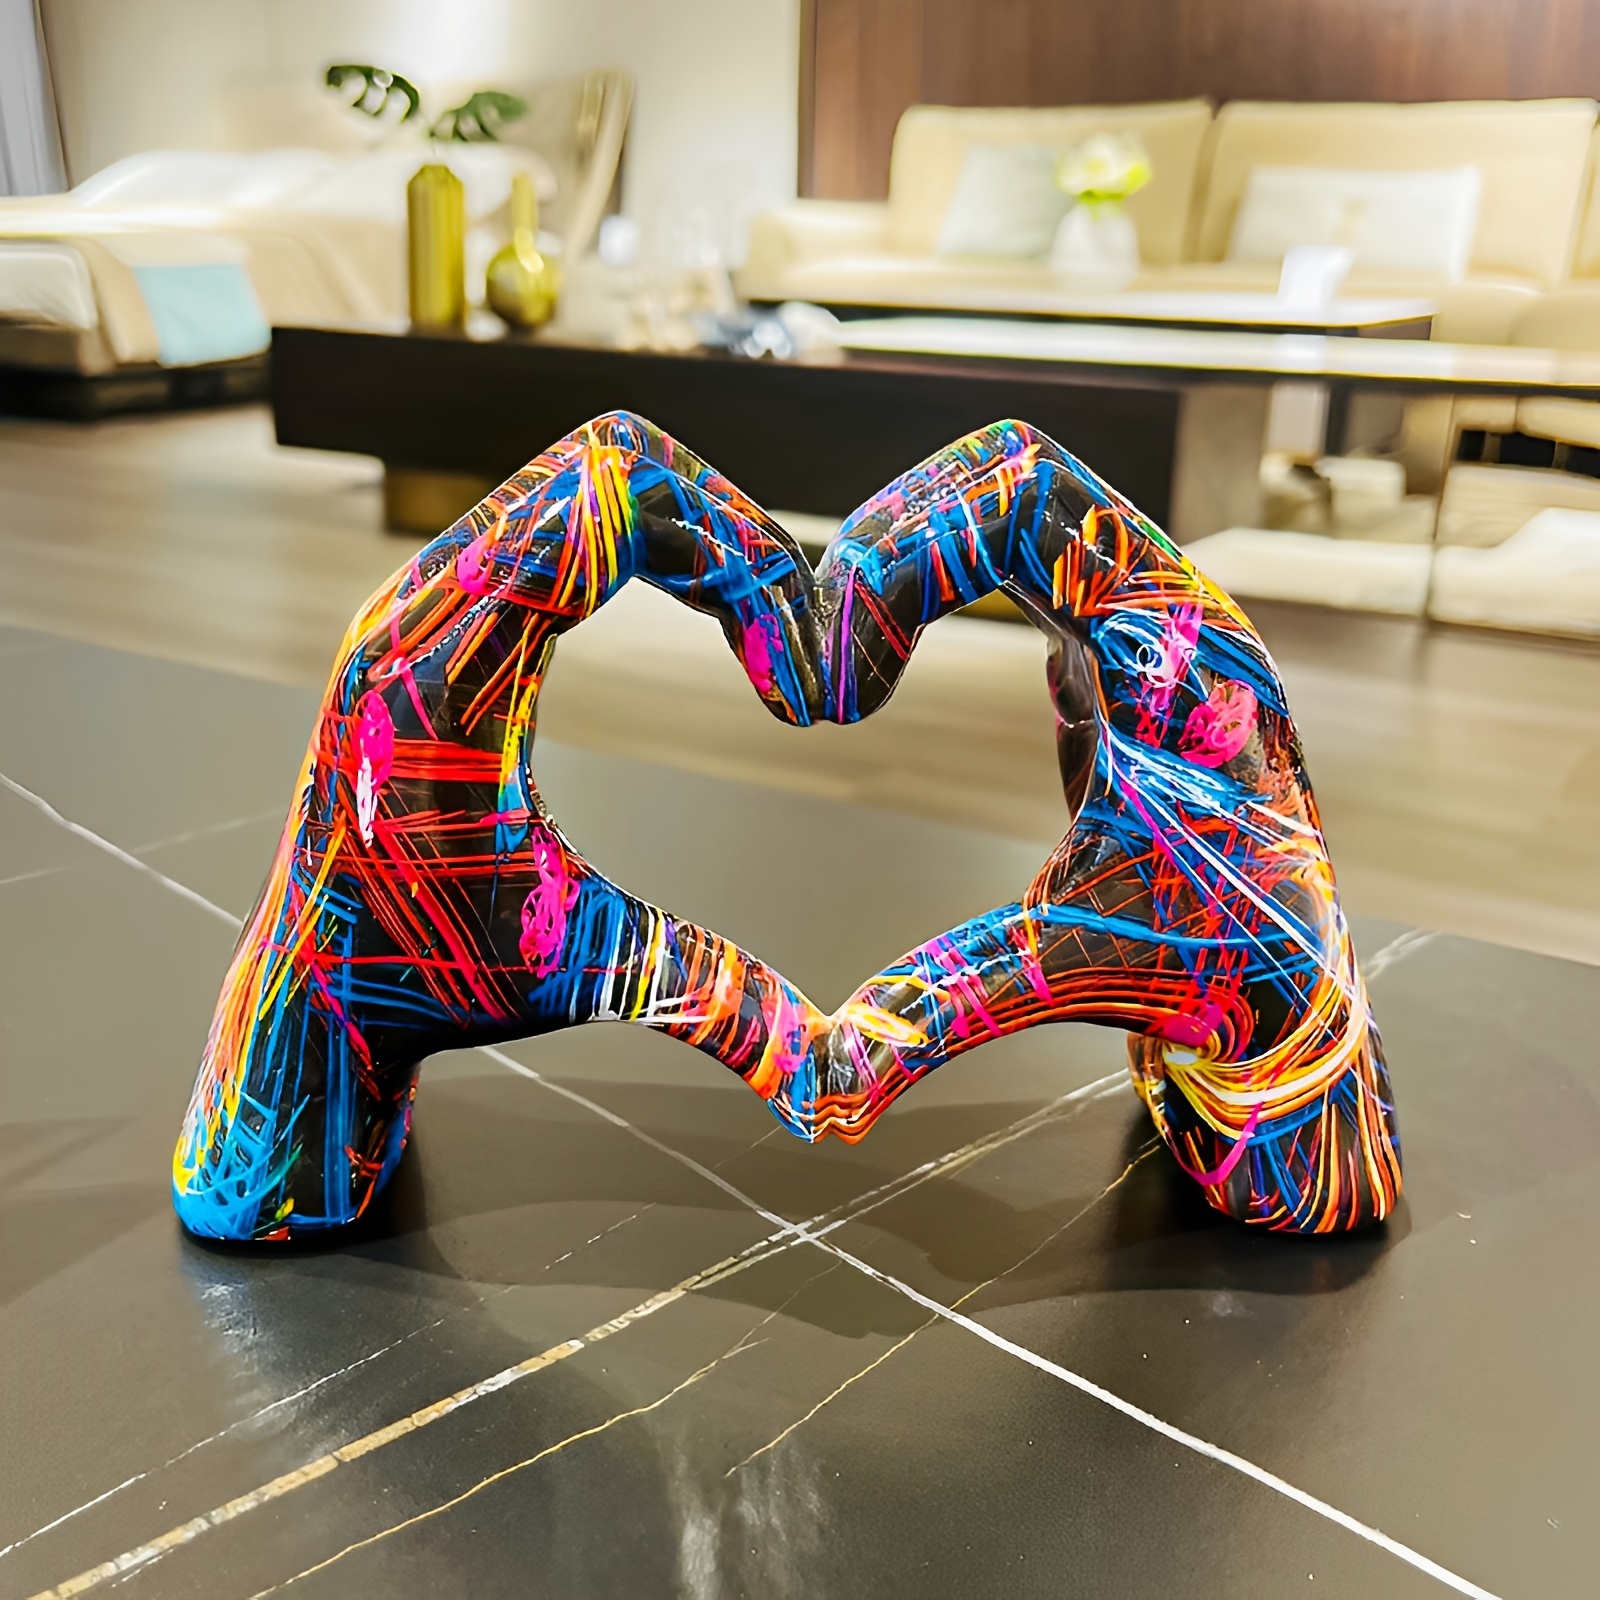  TIMEBUS Heart Hands Sculpture Modern Home Decor, Art Hand  Sculpture Home Decorations for Living Room, Nary Blue Love Finger Statue  for Bedroom Shelf Coffee Table Centerpiece Gifts for Women Wedding 